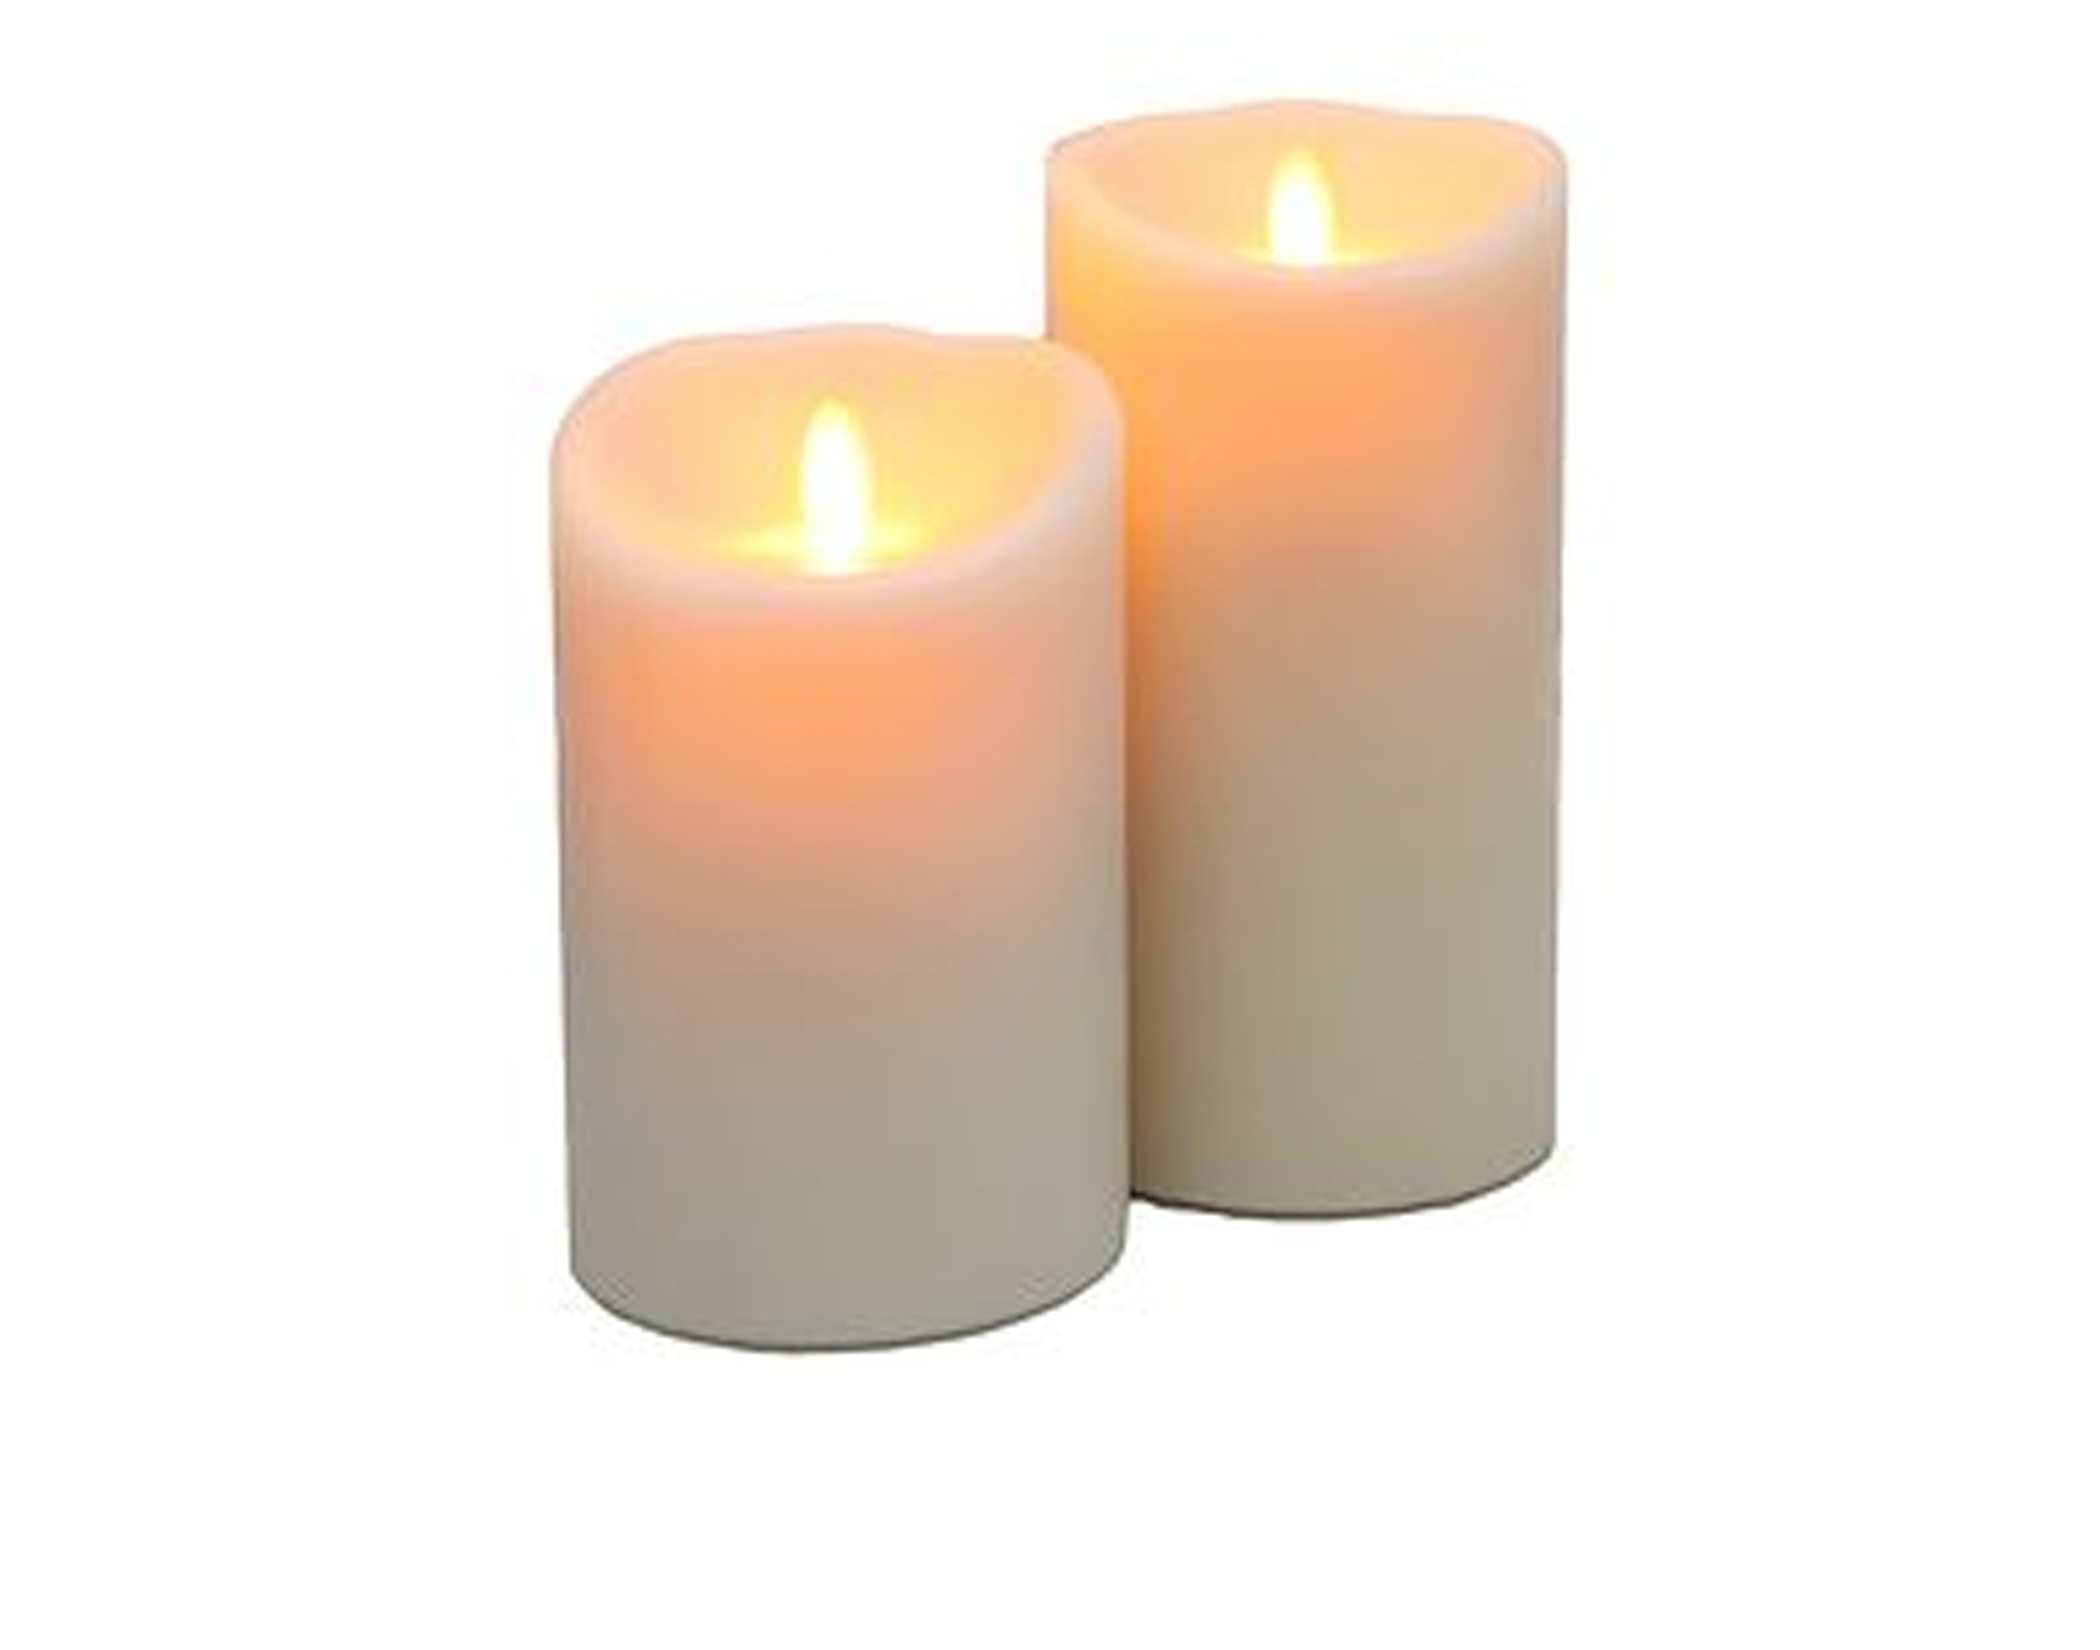 CandlesPng Image PNG Image, PNG Candles Free - Free PNG